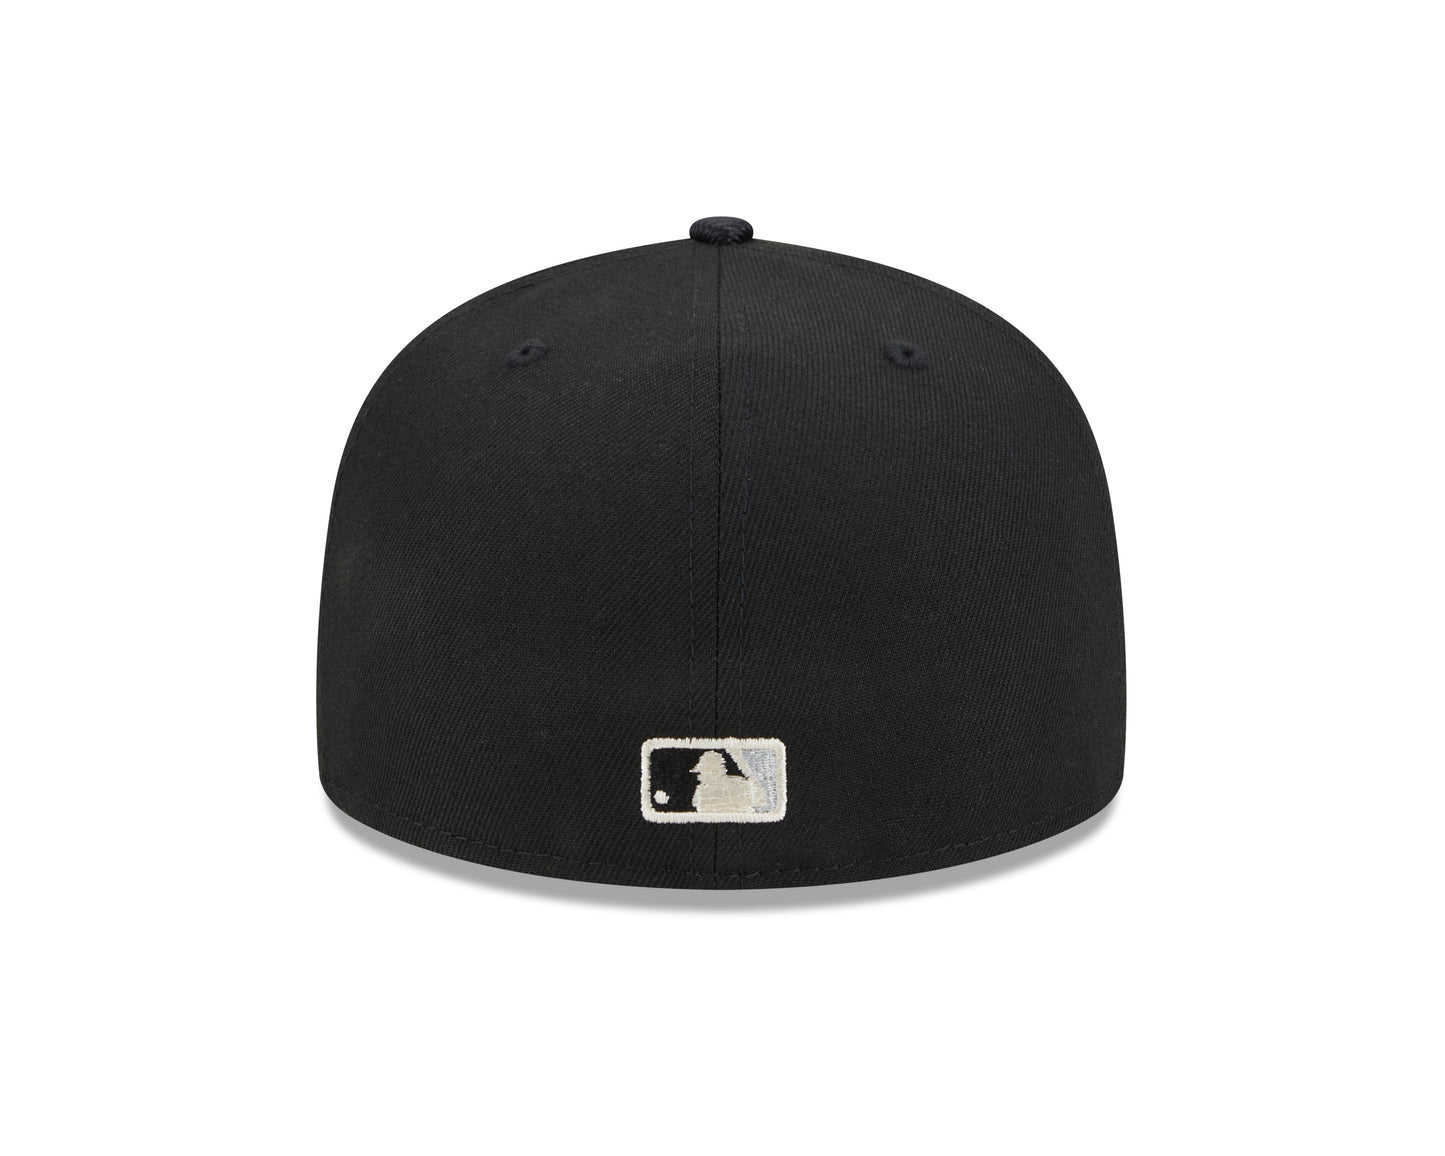 New Era - Chicago White Sox 59Fifty Fitted TEAM SHIMMER - OTC - Headz Up 